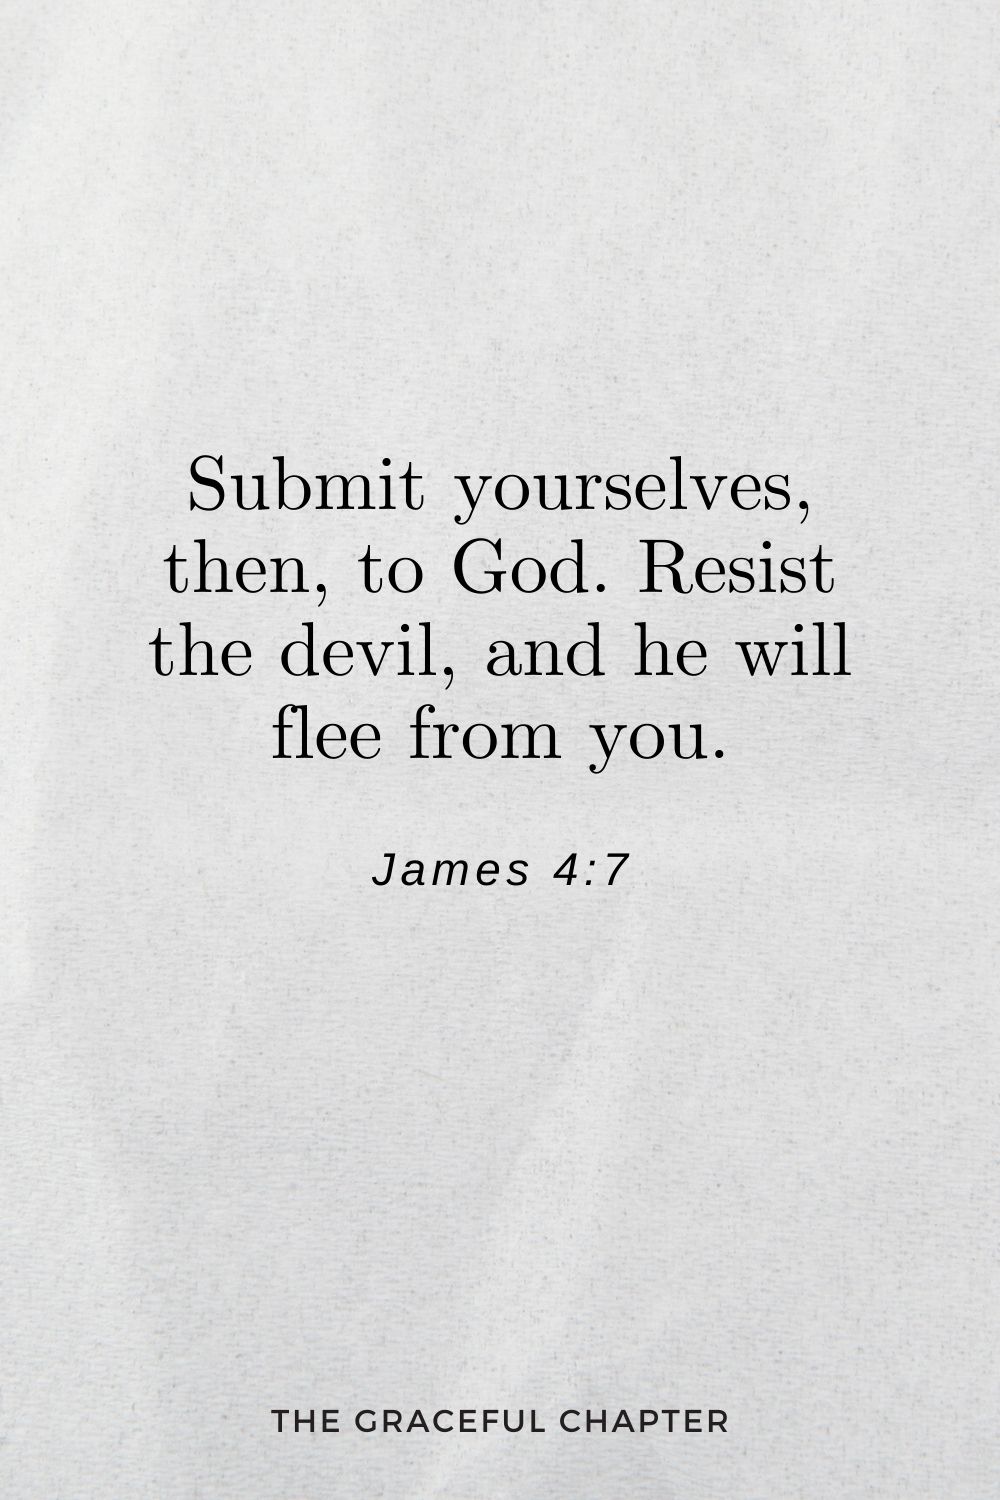 Submit yourselves, then, to God. Resist the devil, and he will flee from you. James 4:7